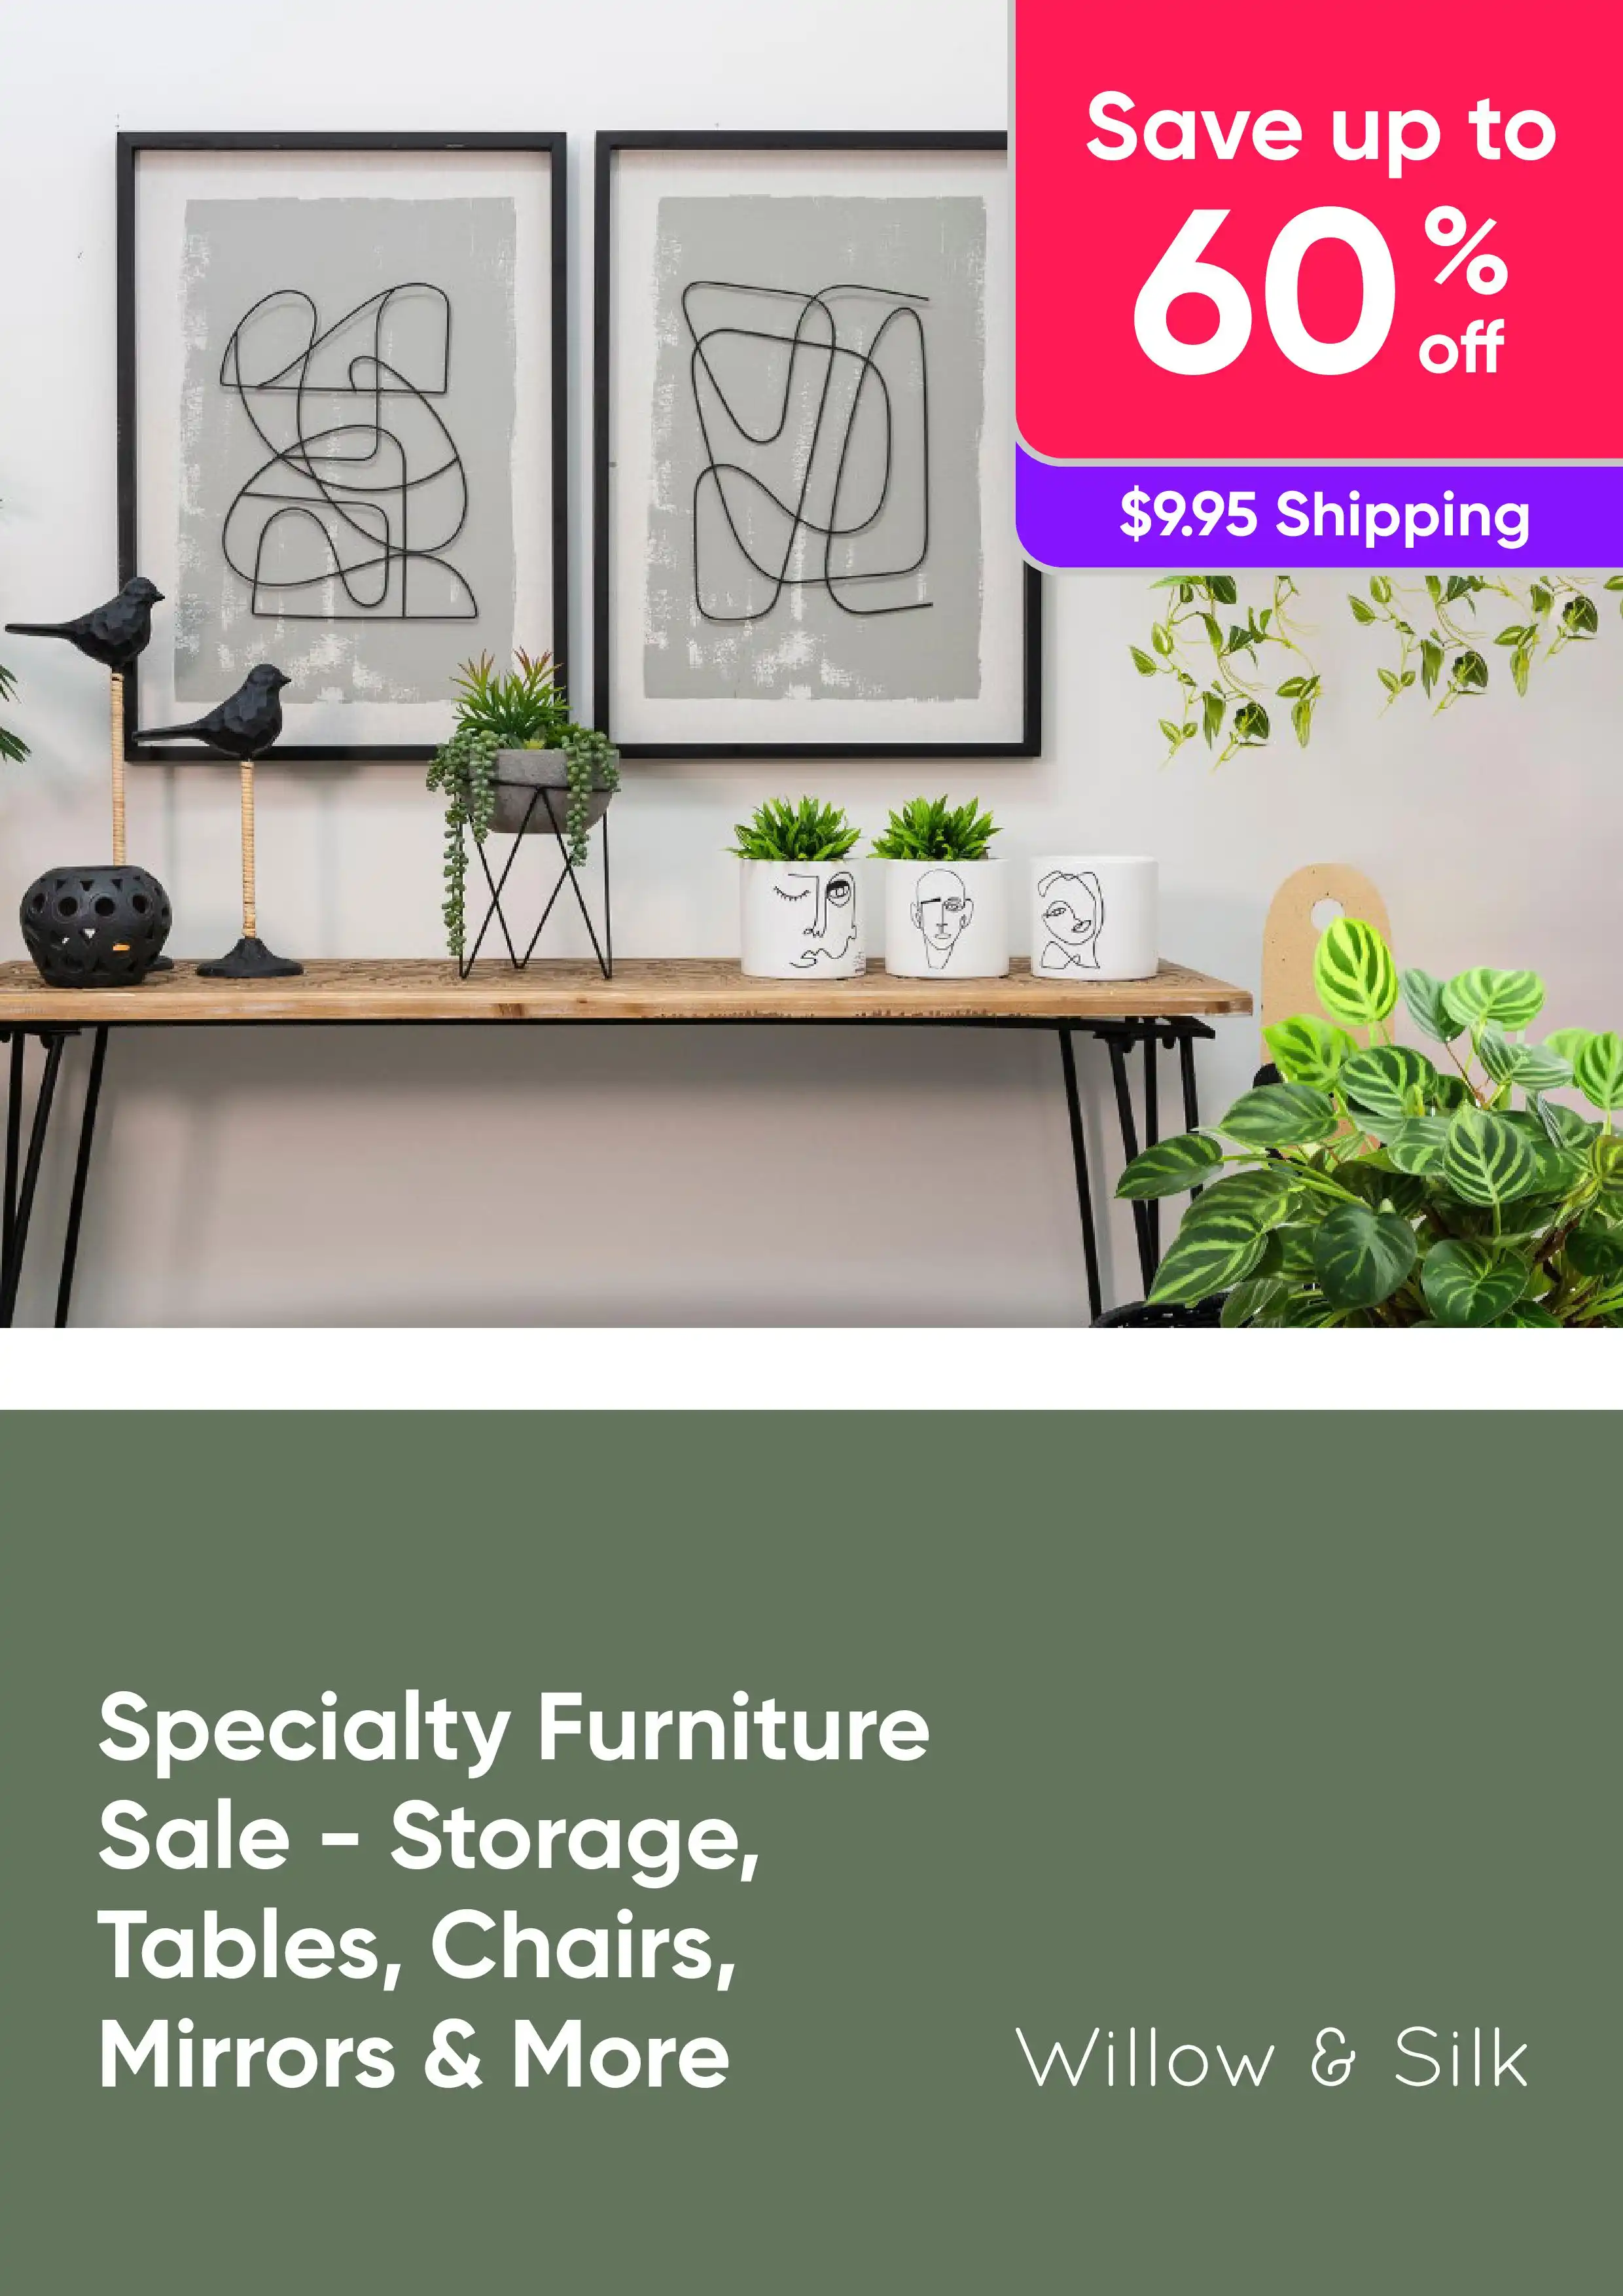 Specialty Furniture Sale - Save Up To 60% On Storage, Tables, Chairs, Mirrors